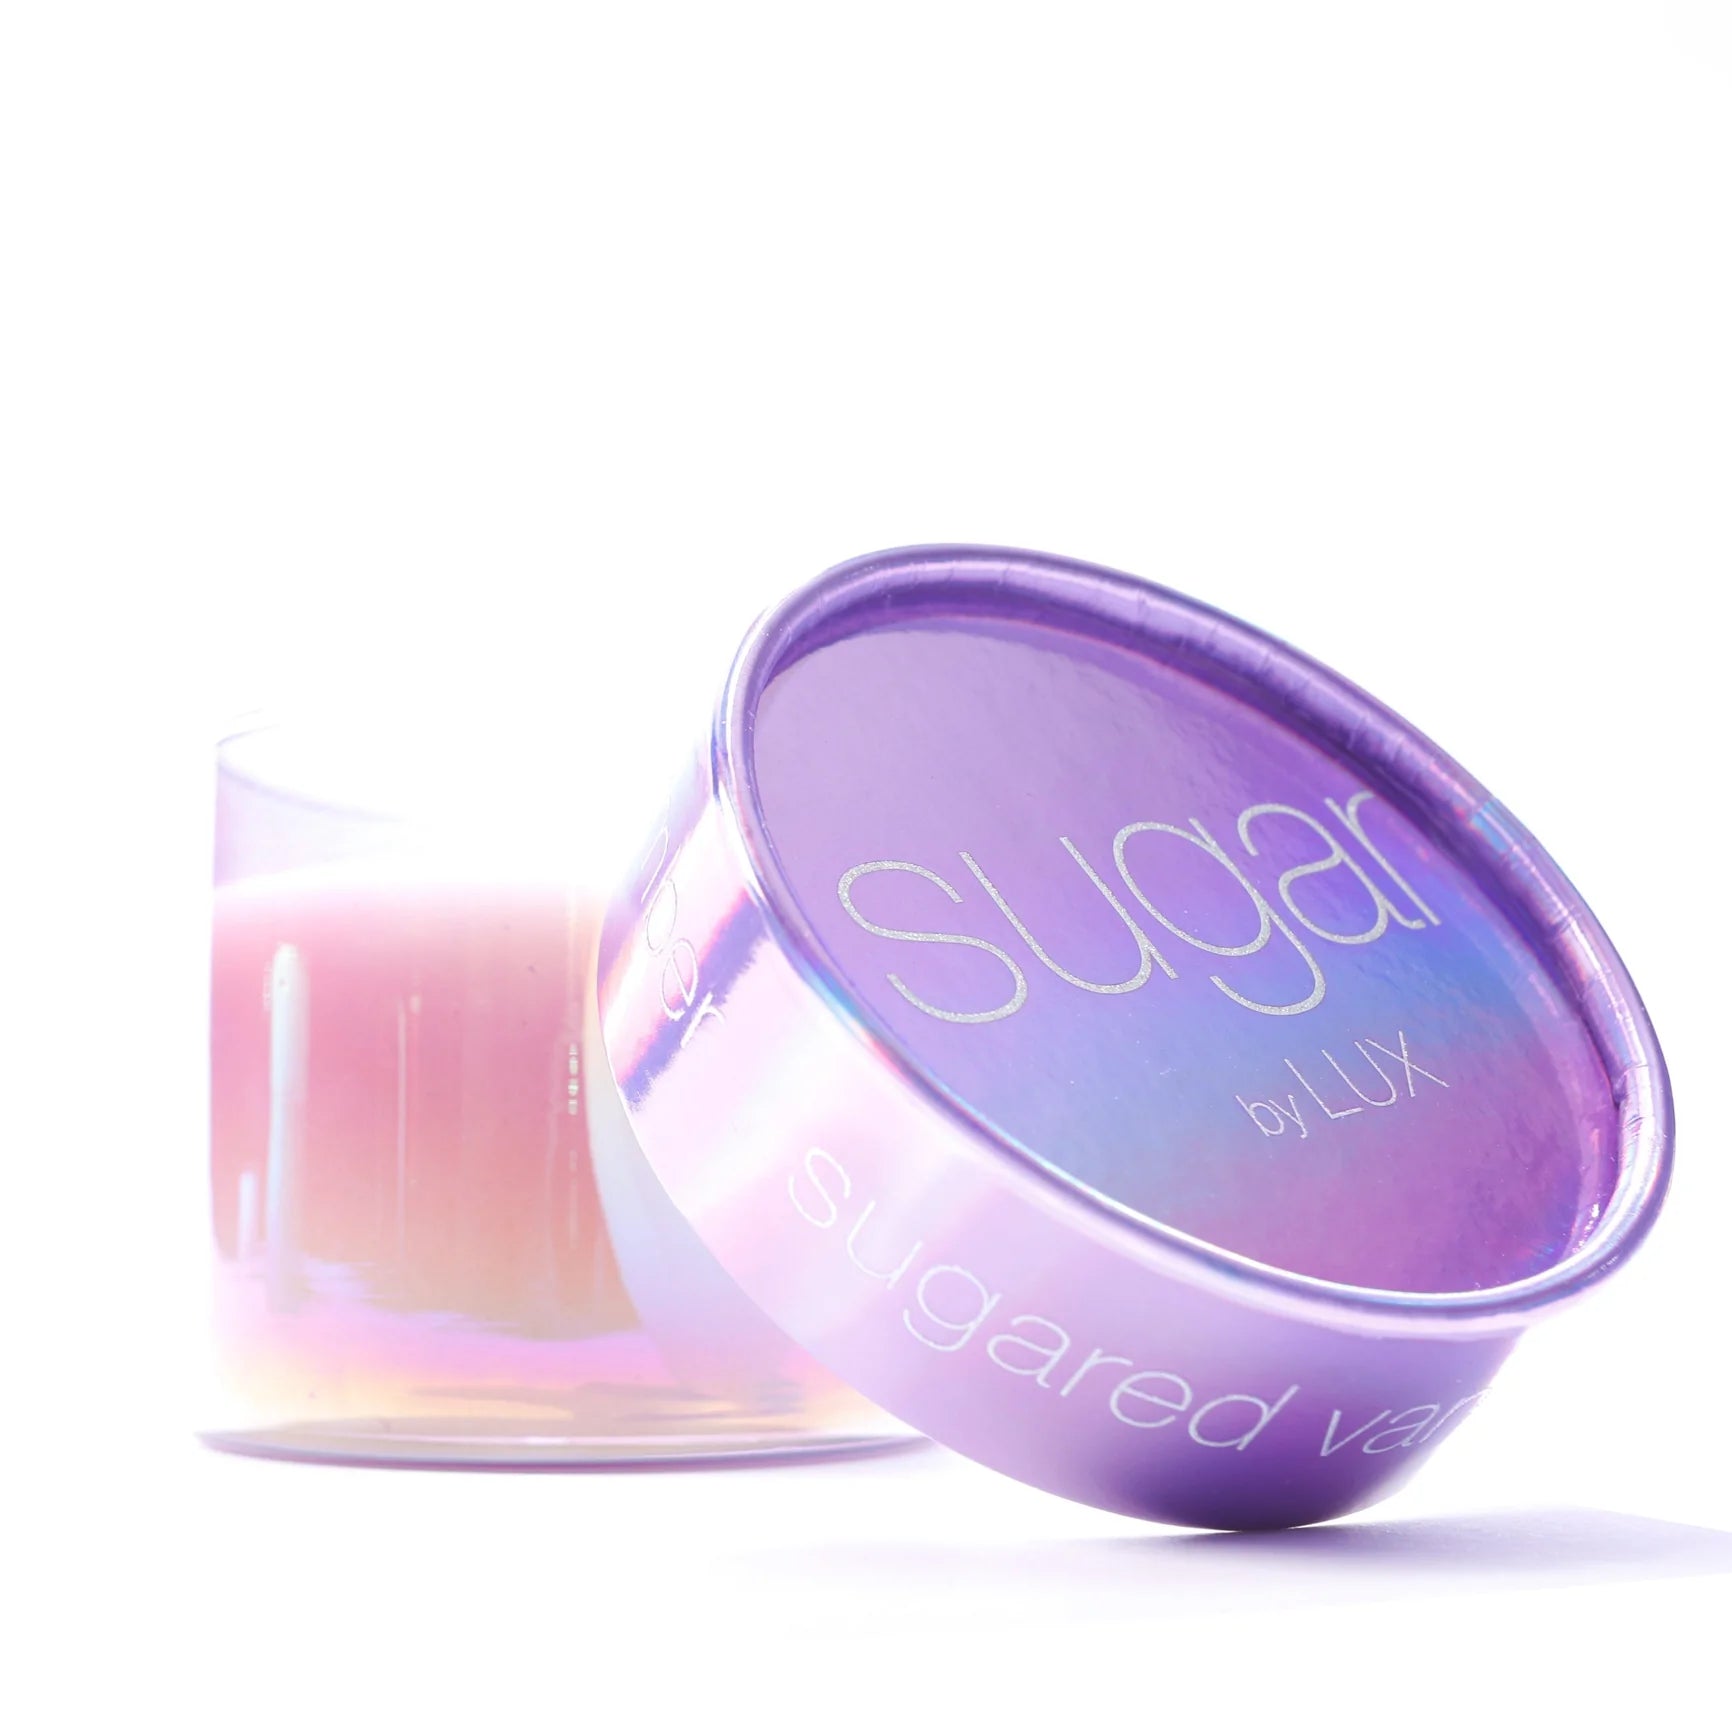 Sugar by Lux Fragrance Candle- Sugared Vanilla& Amber